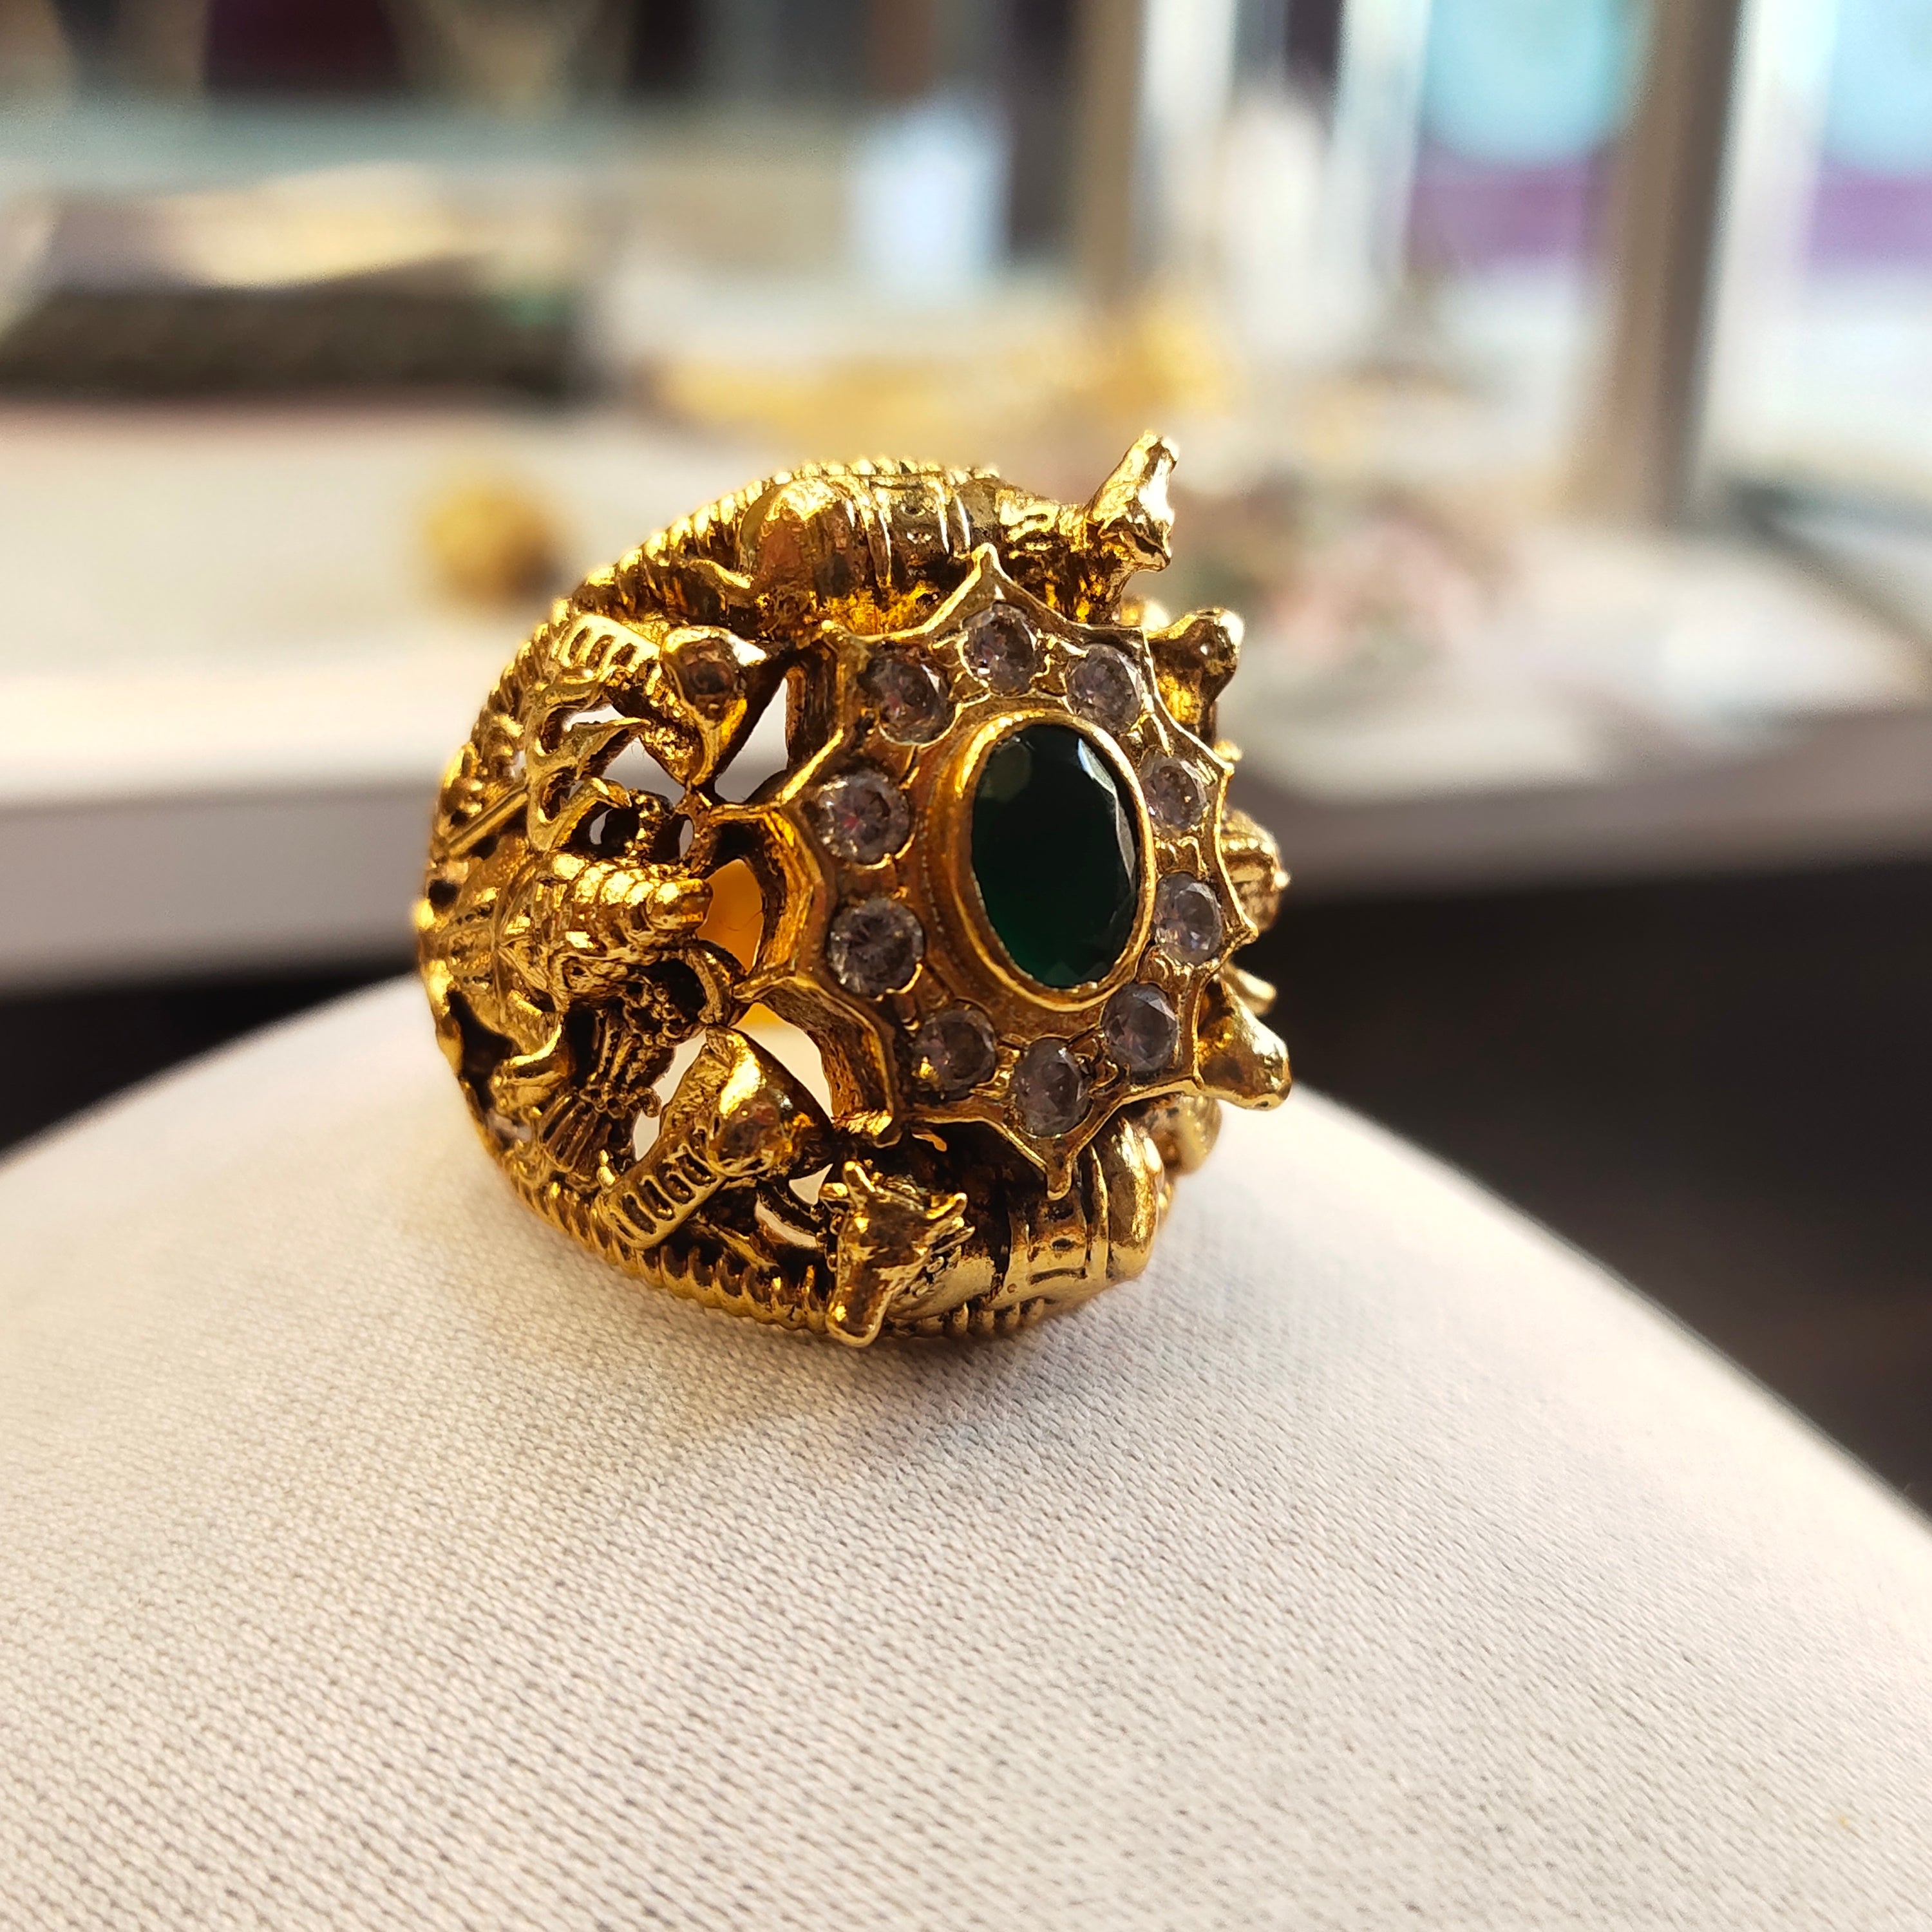 Emerald Gold Rings designed specially for her by New Maharaja Gem  Palace,Jaipur. - Picture of New Maharaja Gem Palace, Jaipur - Tripadvisor